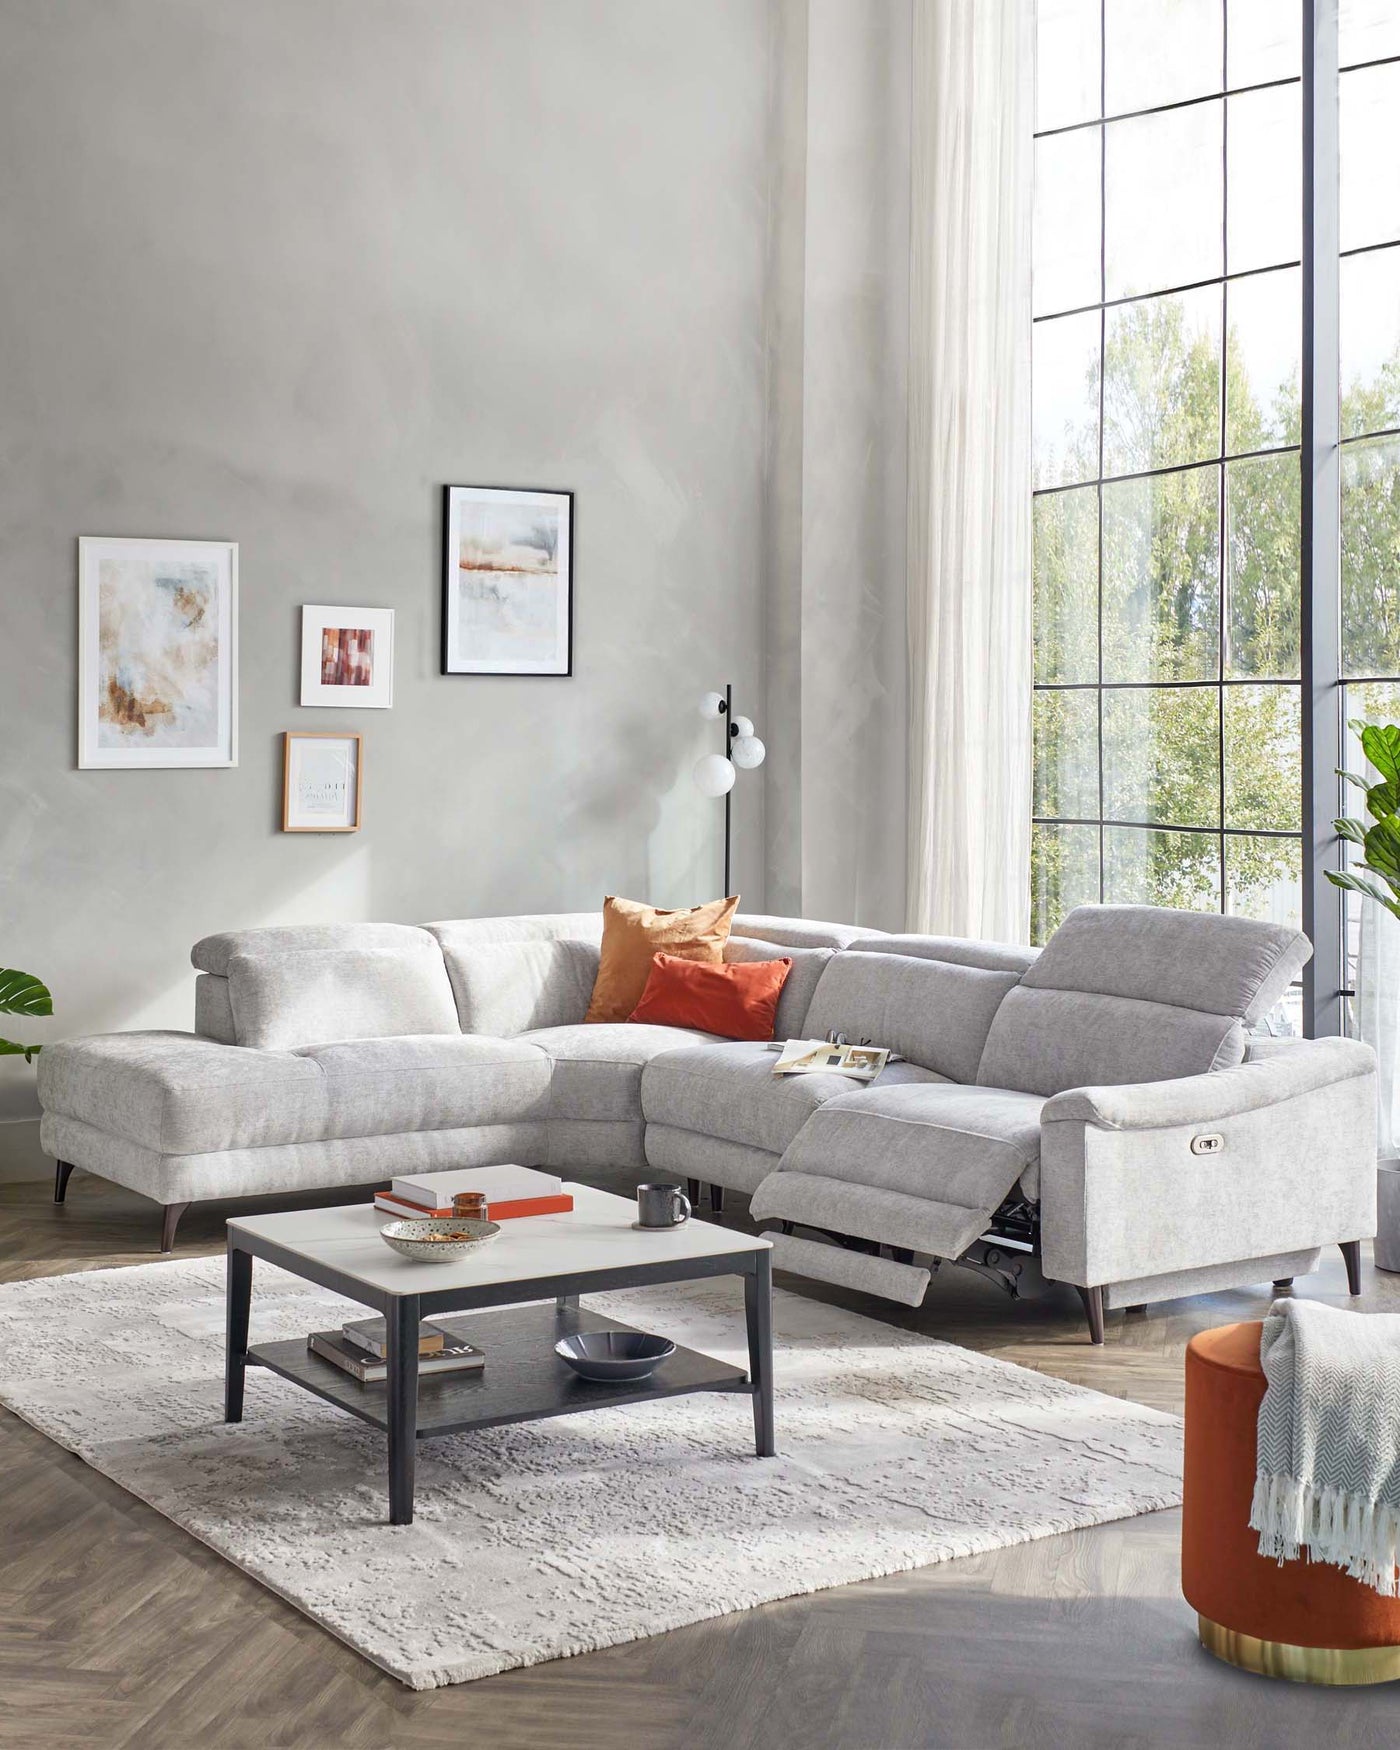 Contemporary light grey sectional sofa with various cushions, a rectangular black metal coffee table with a wooden top and a bottom shelf, situated on a plush grey area rug.